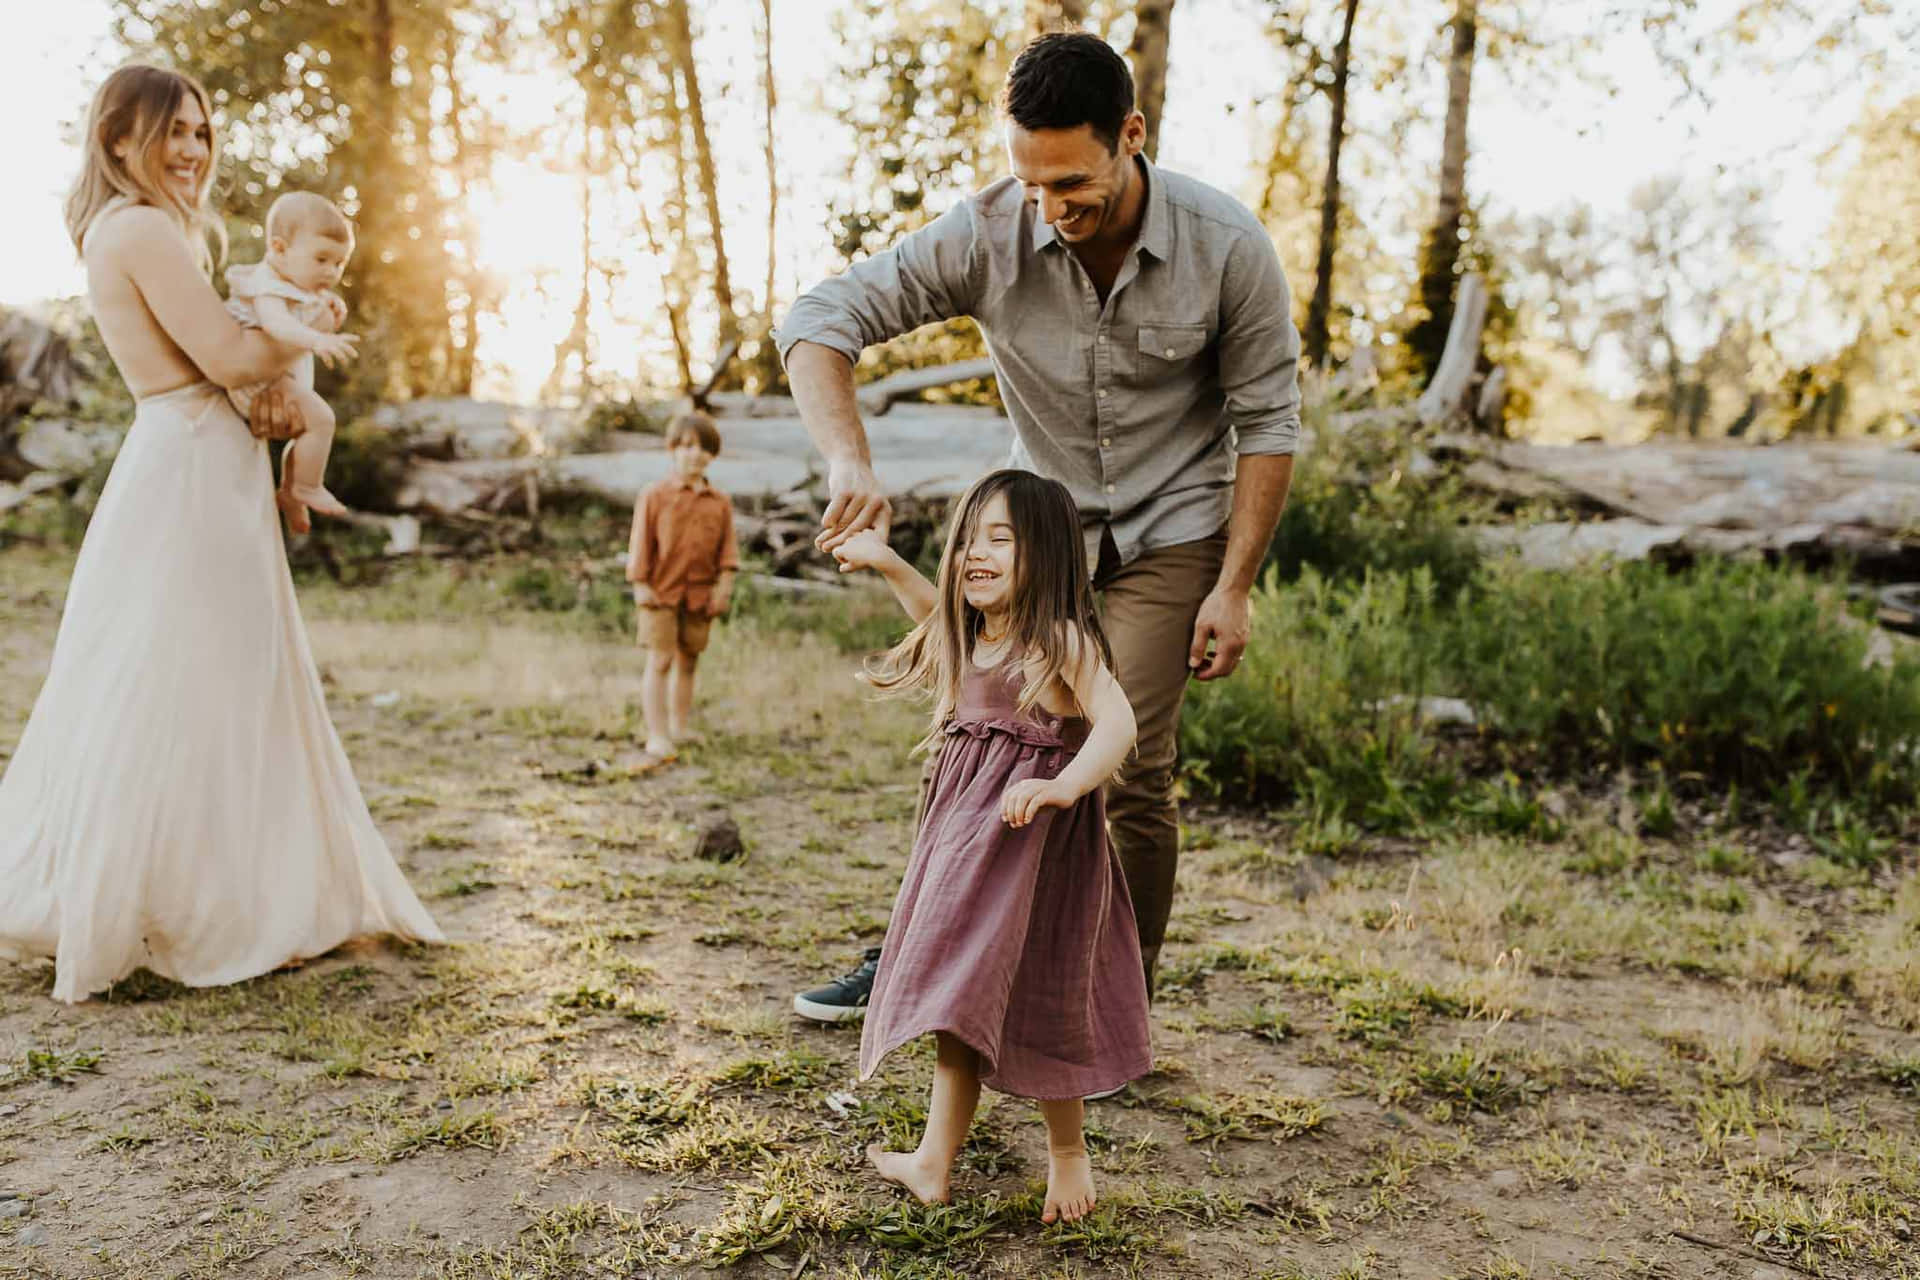 A Family Is Playing With Their Daughter In The Woods